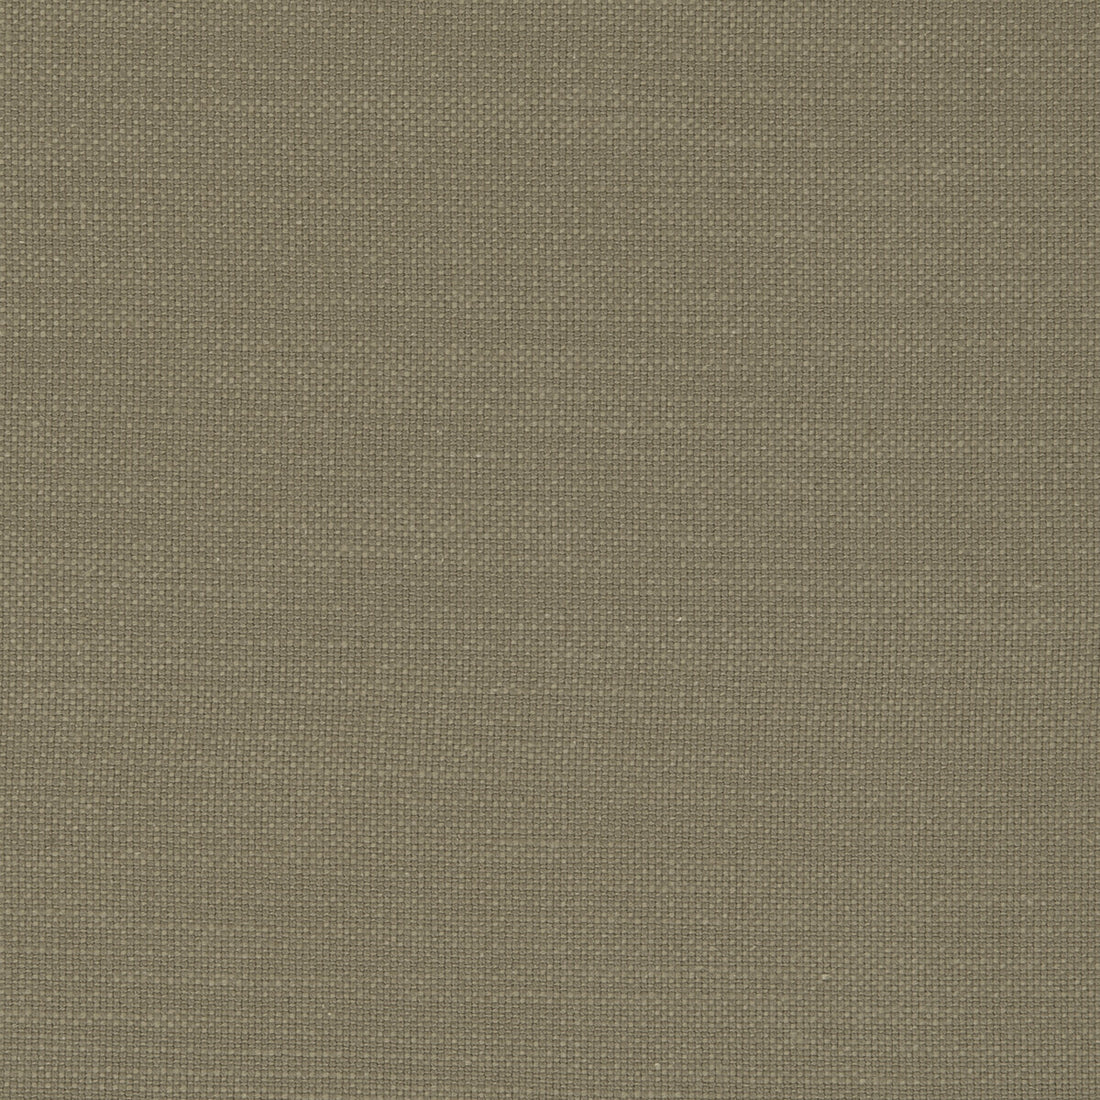 Nantucket fabric in flax color - pattern F0594/20.CAC.0 - by Clarke And Clarke in the Clarke &amp; Clarke Nantucket collection